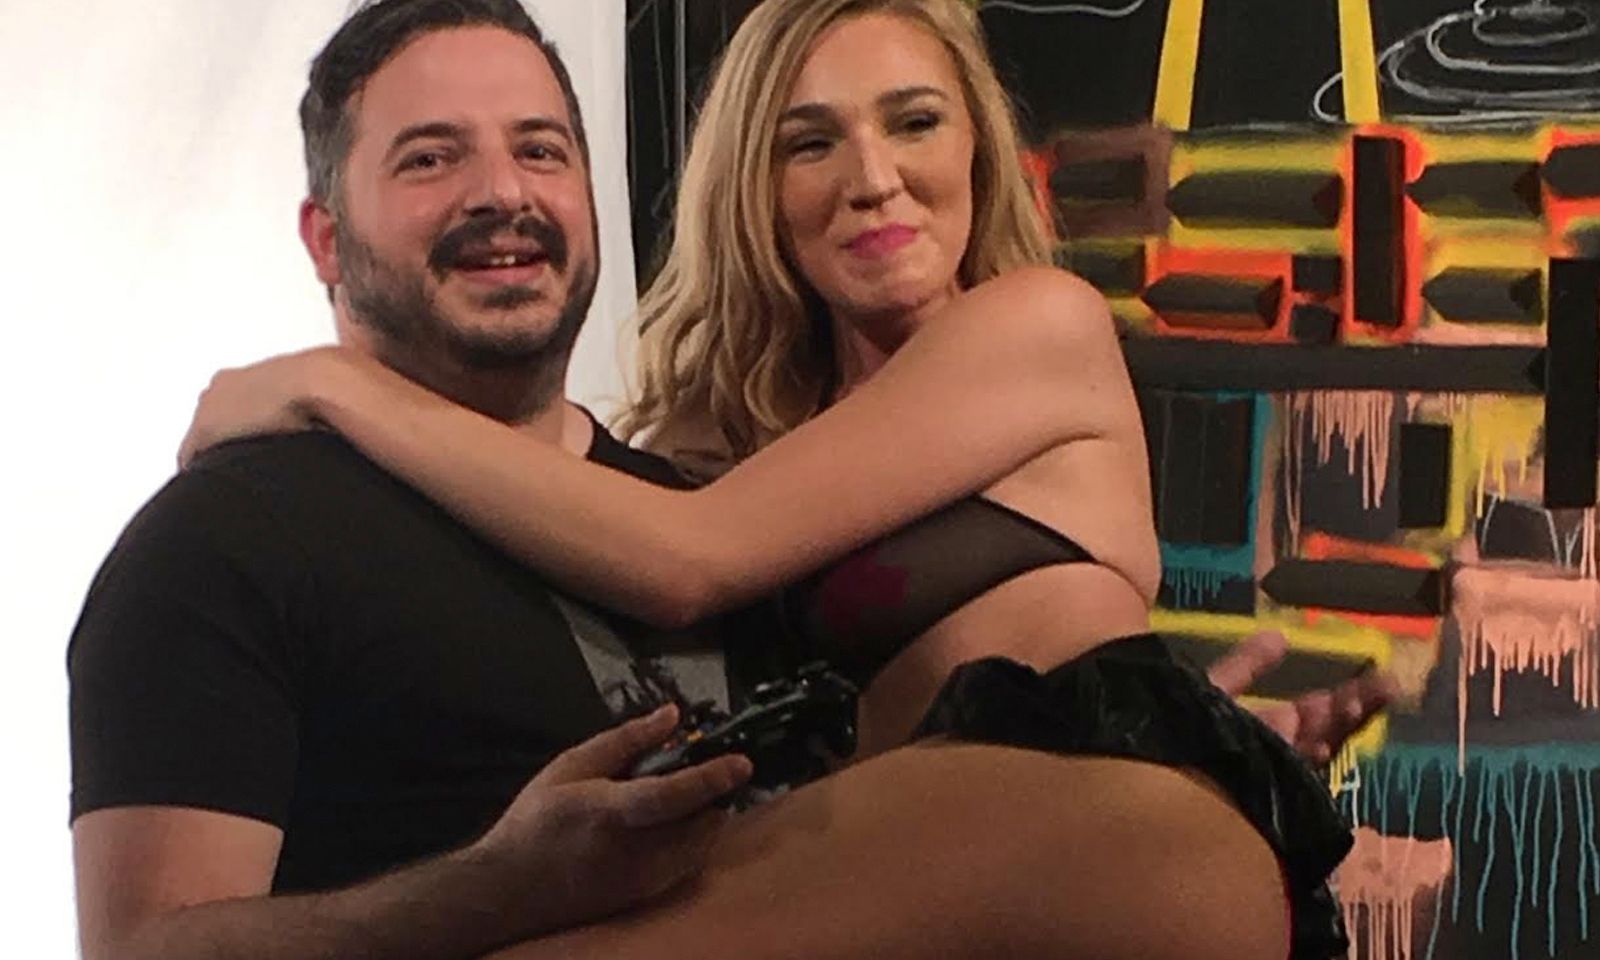 Gamer Up Comedy Video Features Kendra Sunderland